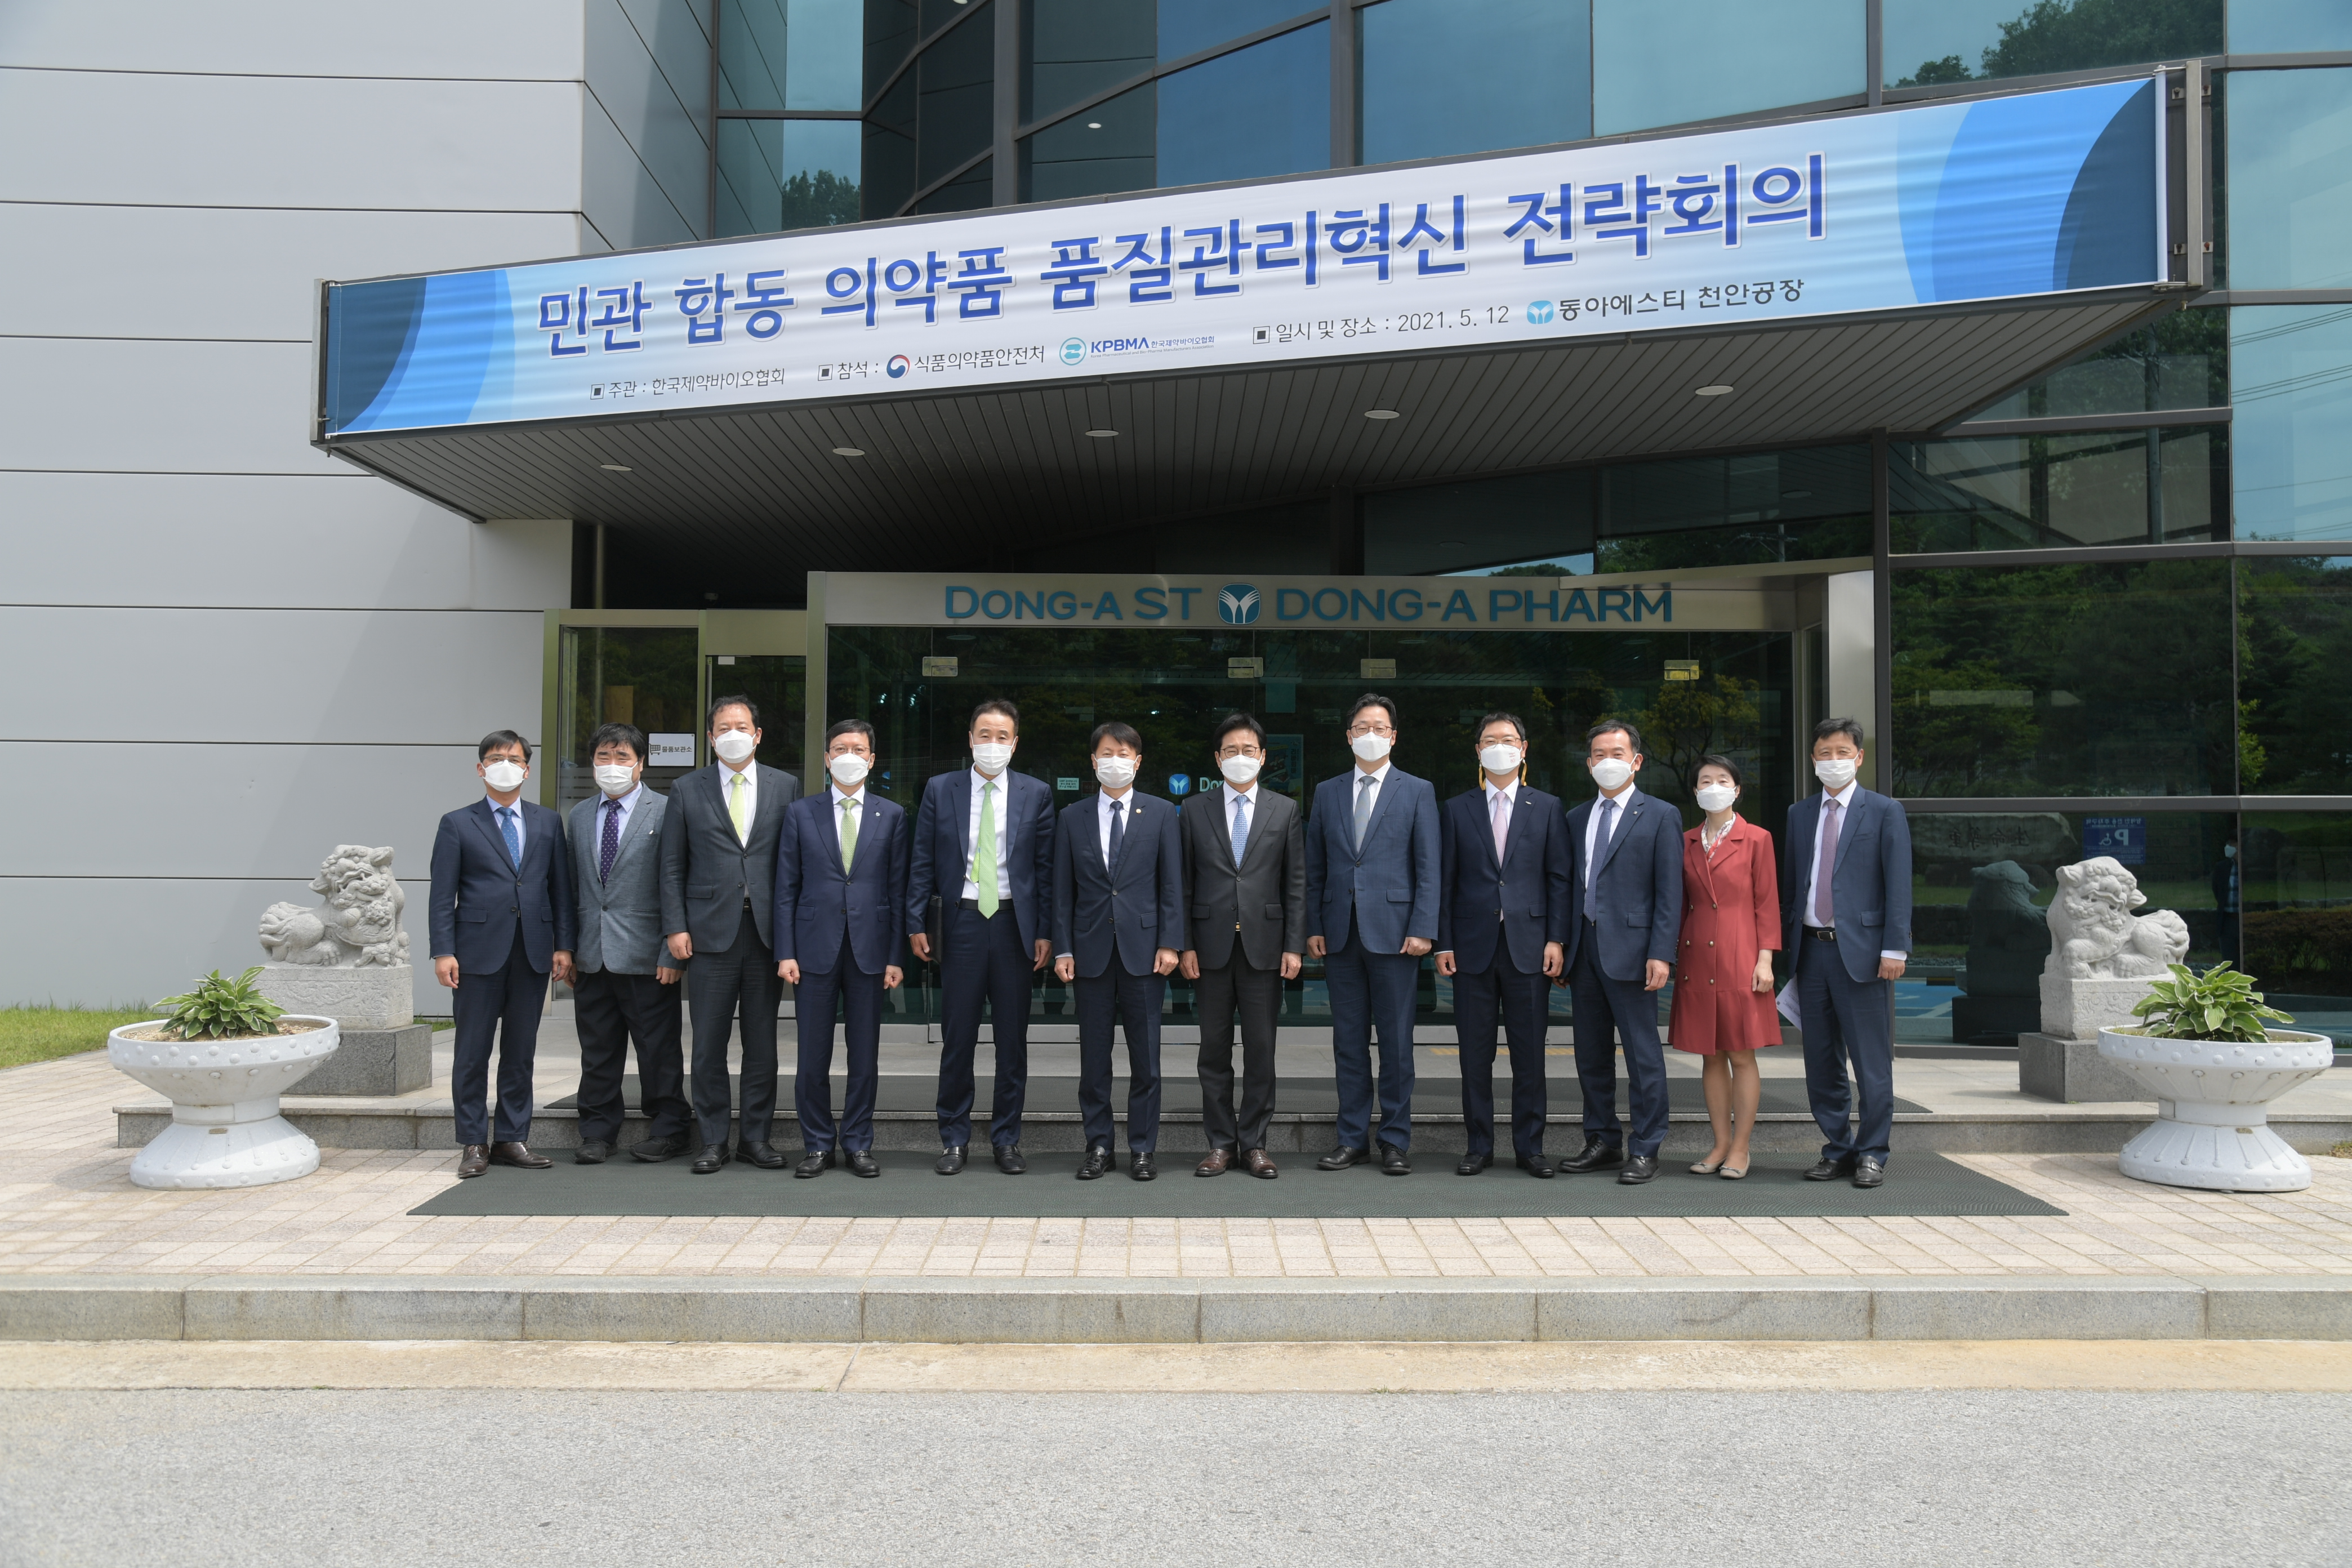 Photo News1 - [May 12, 2021] Minister attends the Public-Private Joint Medical Product Quality Management Innovation Strategy Meeting